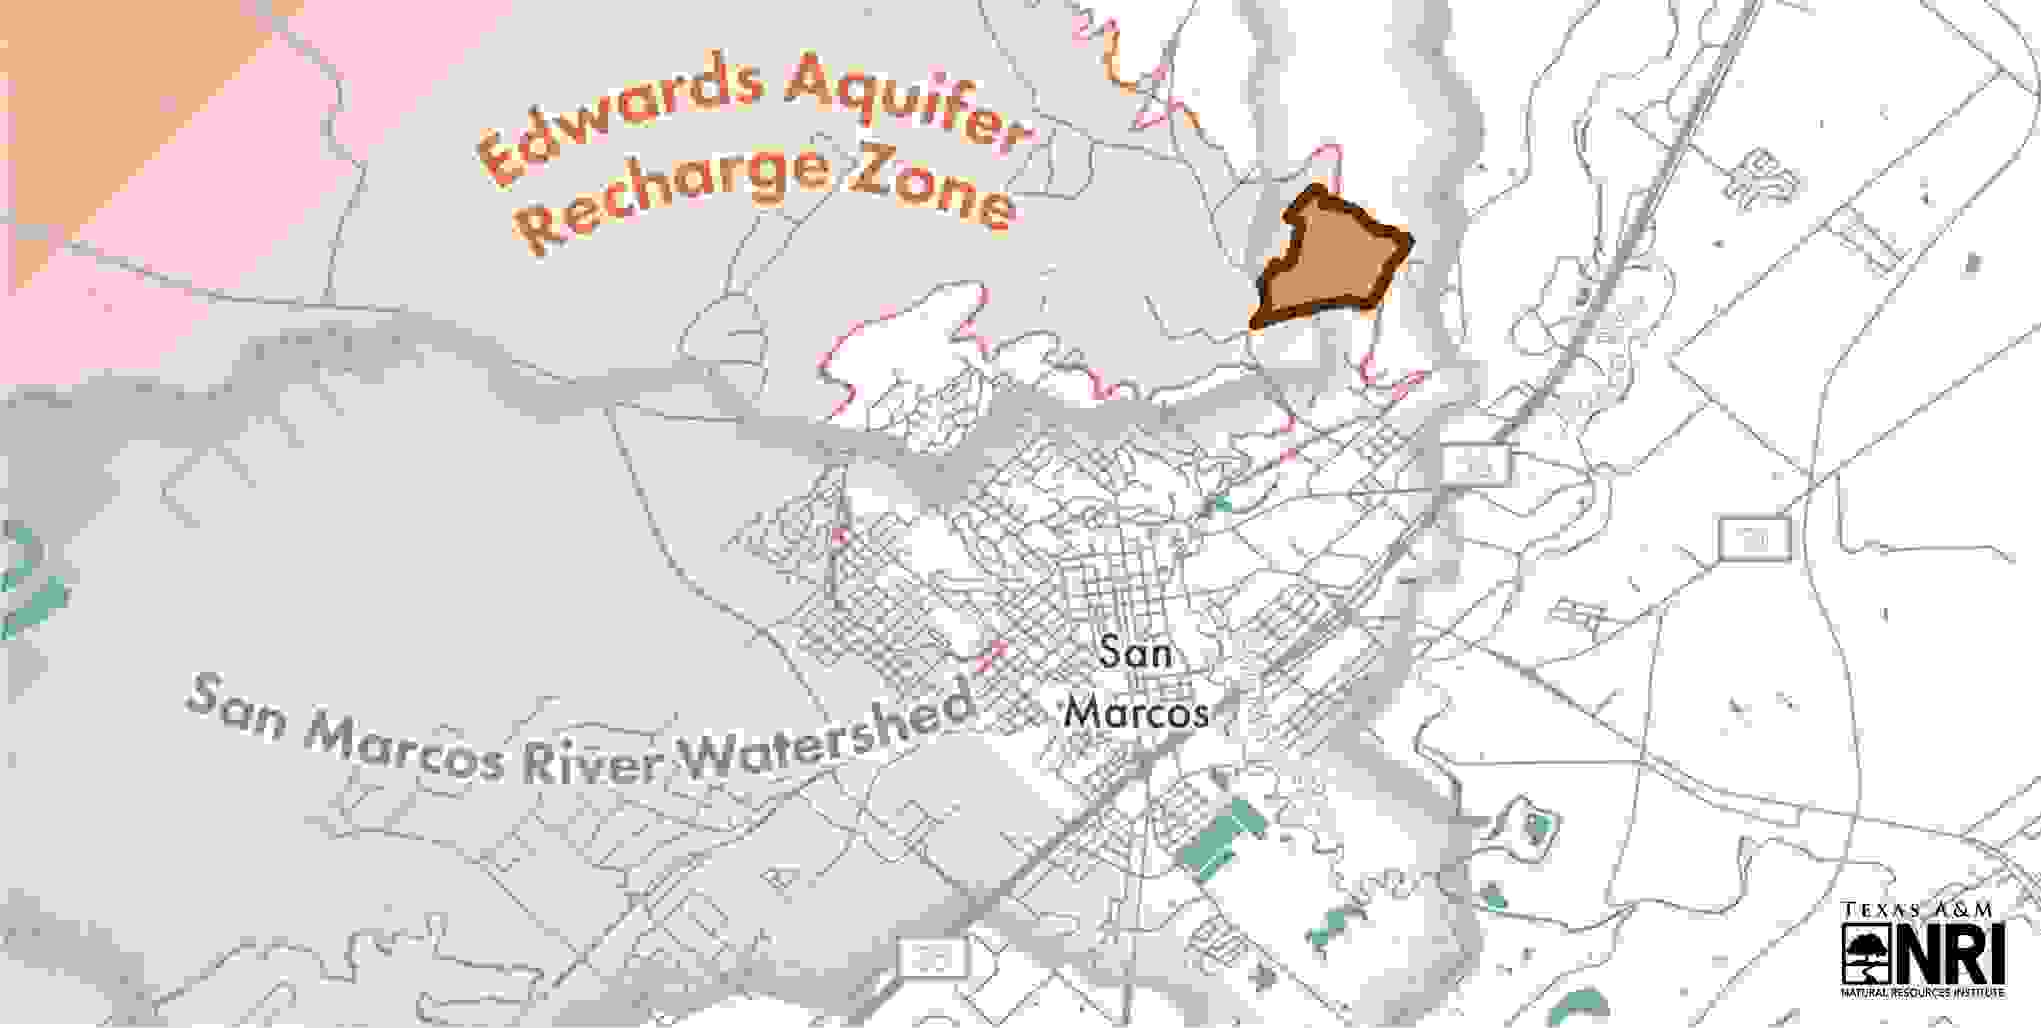 Edwards Aquifer Recharge Zone and the Dreamcatcher Ranch